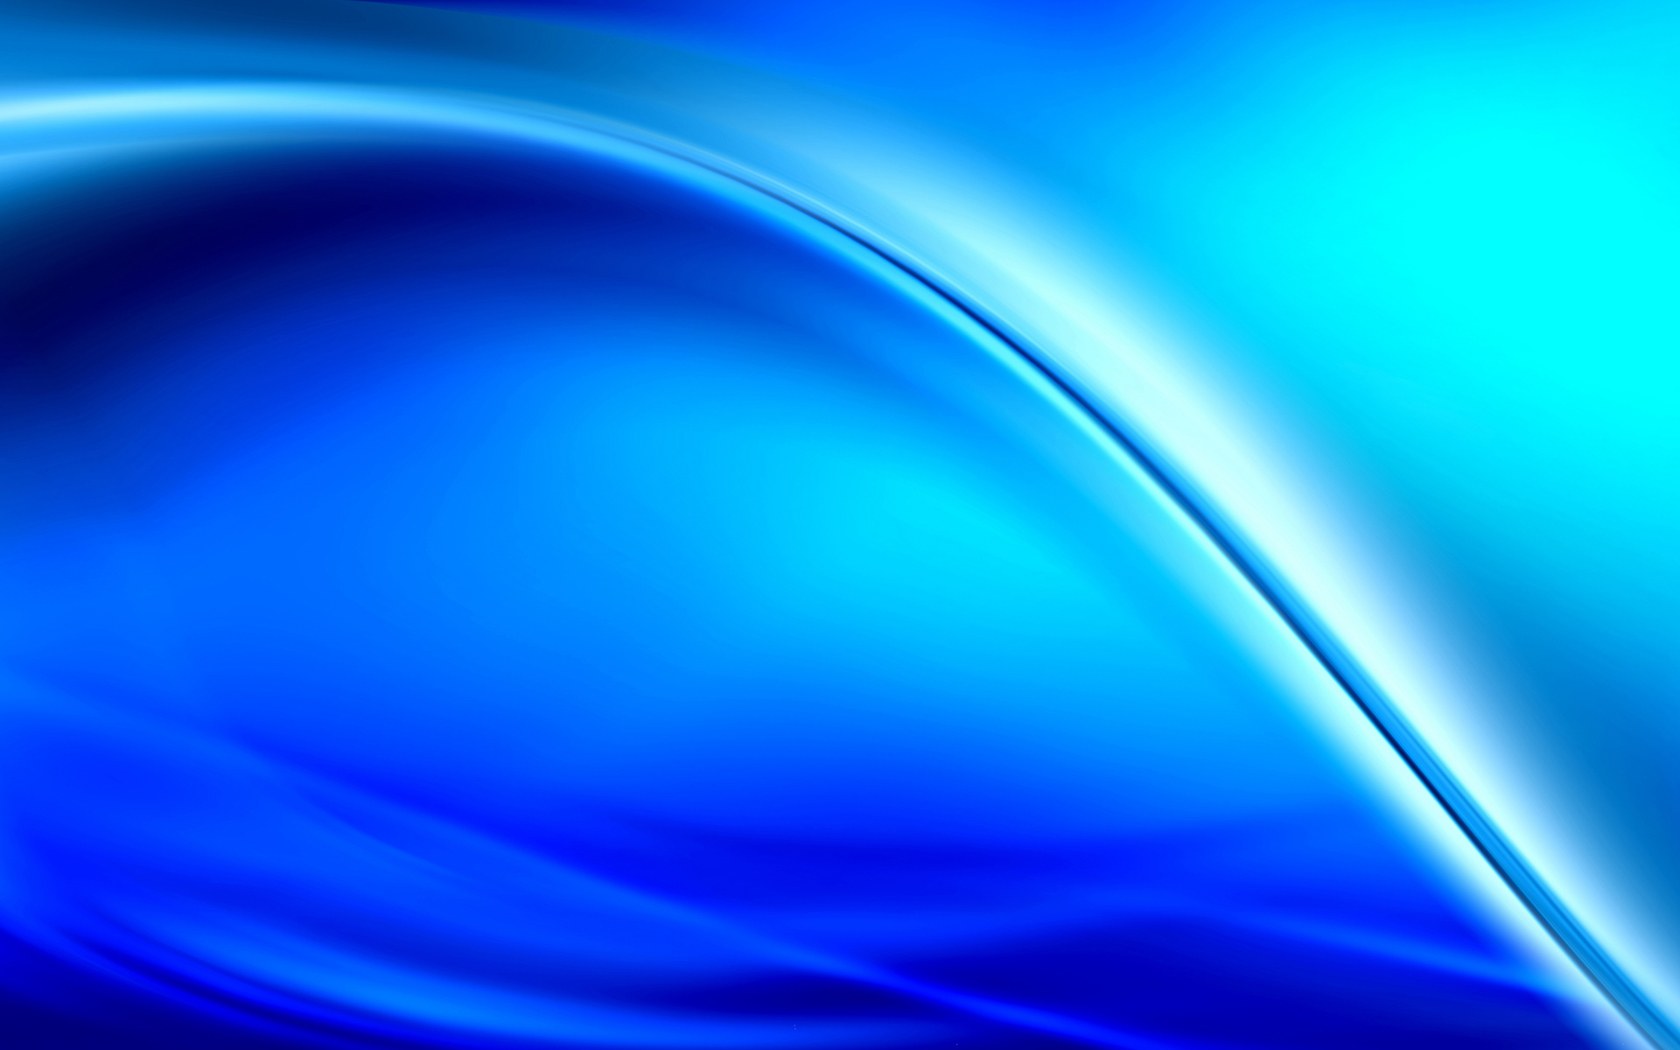  blue background 2015 3 12 hd abstract blue background hd abstract blue 1680x1050